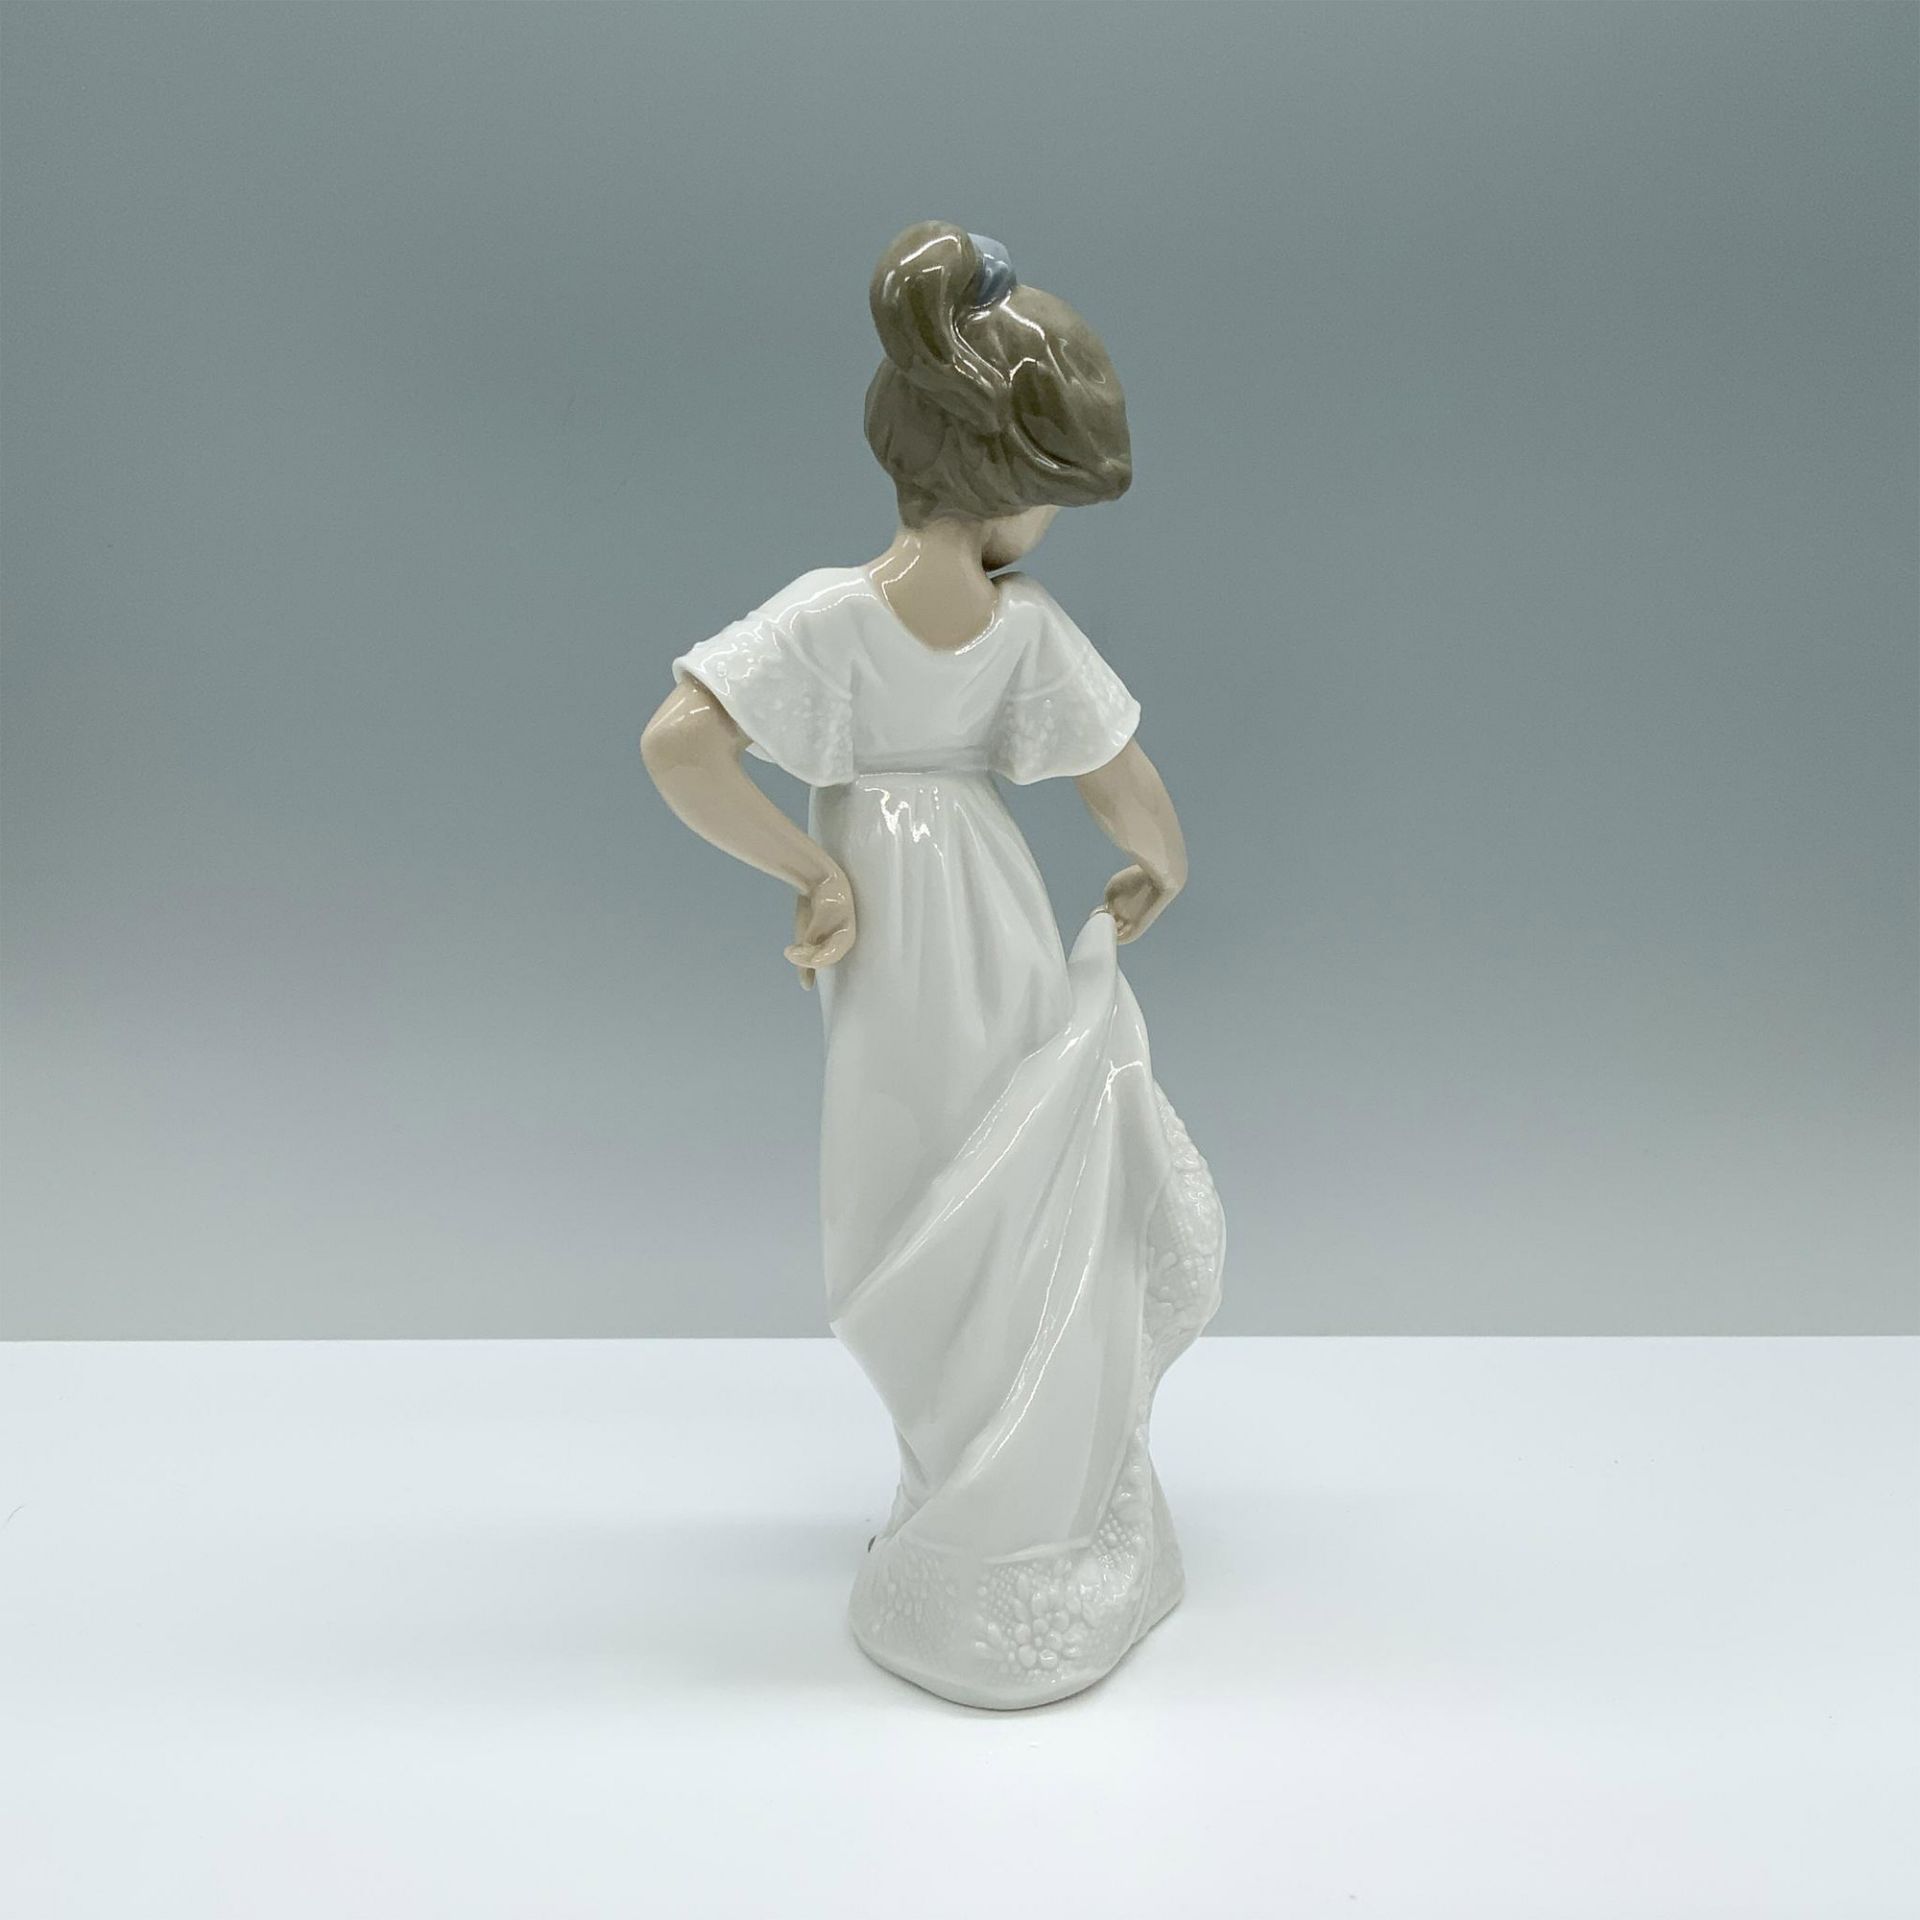 Nao by Lladro Porcelain Figurine, How Pretty! 2001110 - Image 2 of 3